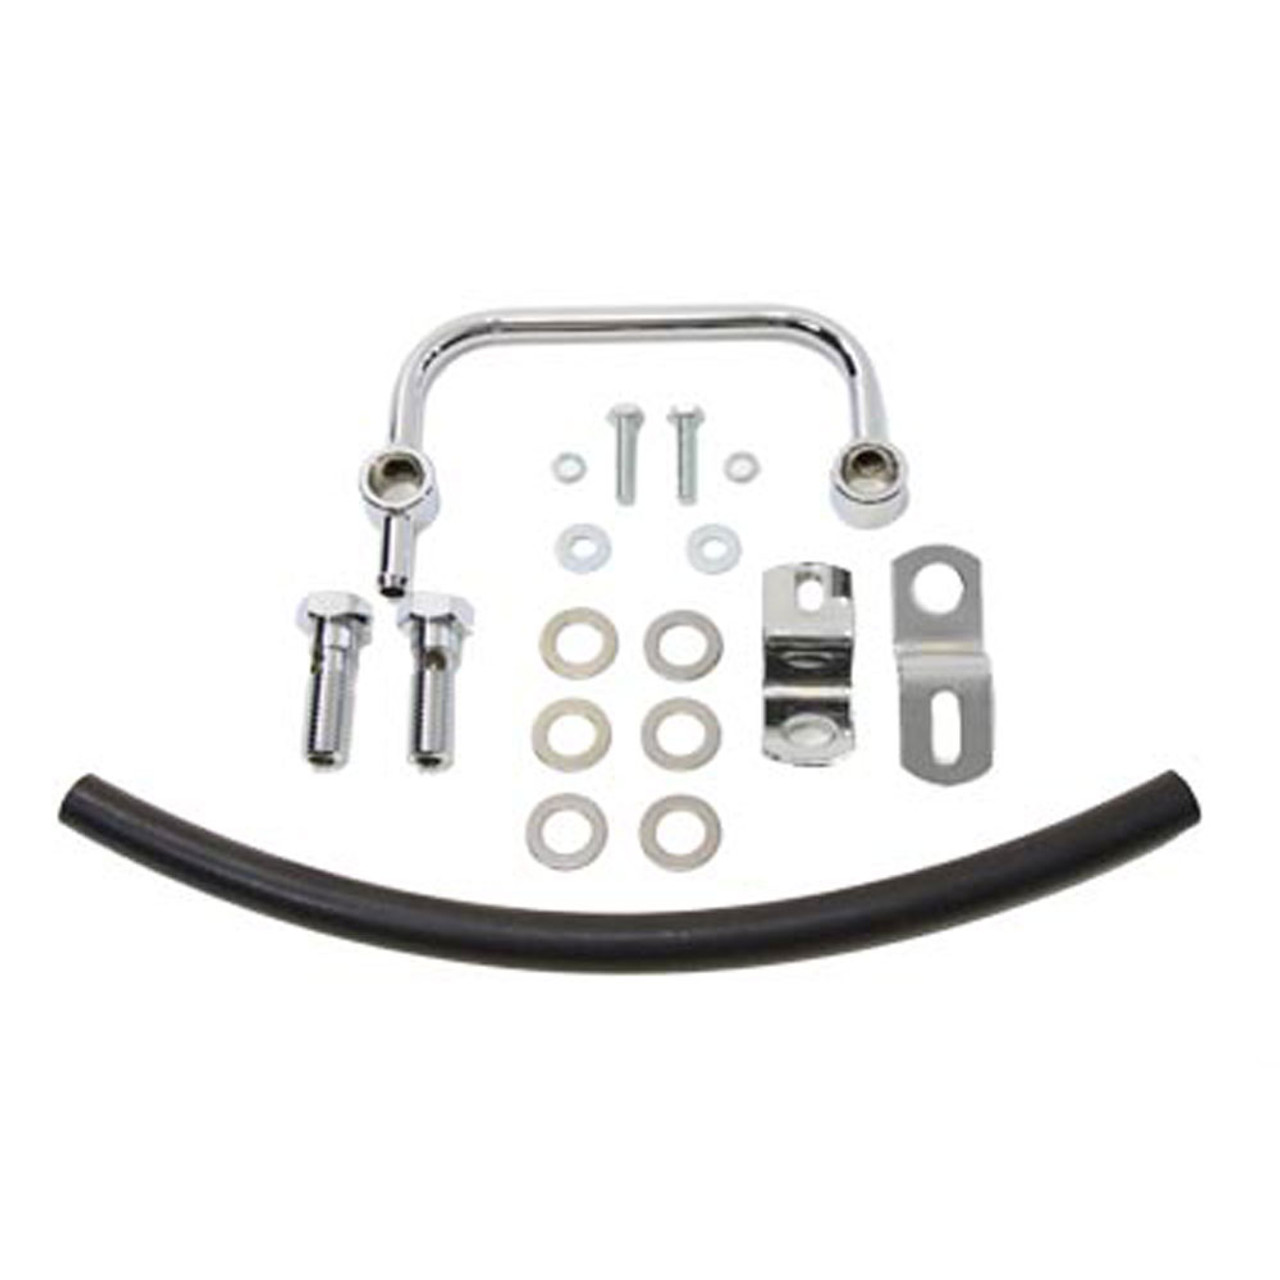 V-Twin Air Cleaner Crankcase Breather Kit for 1991-2016 Harley Sportster